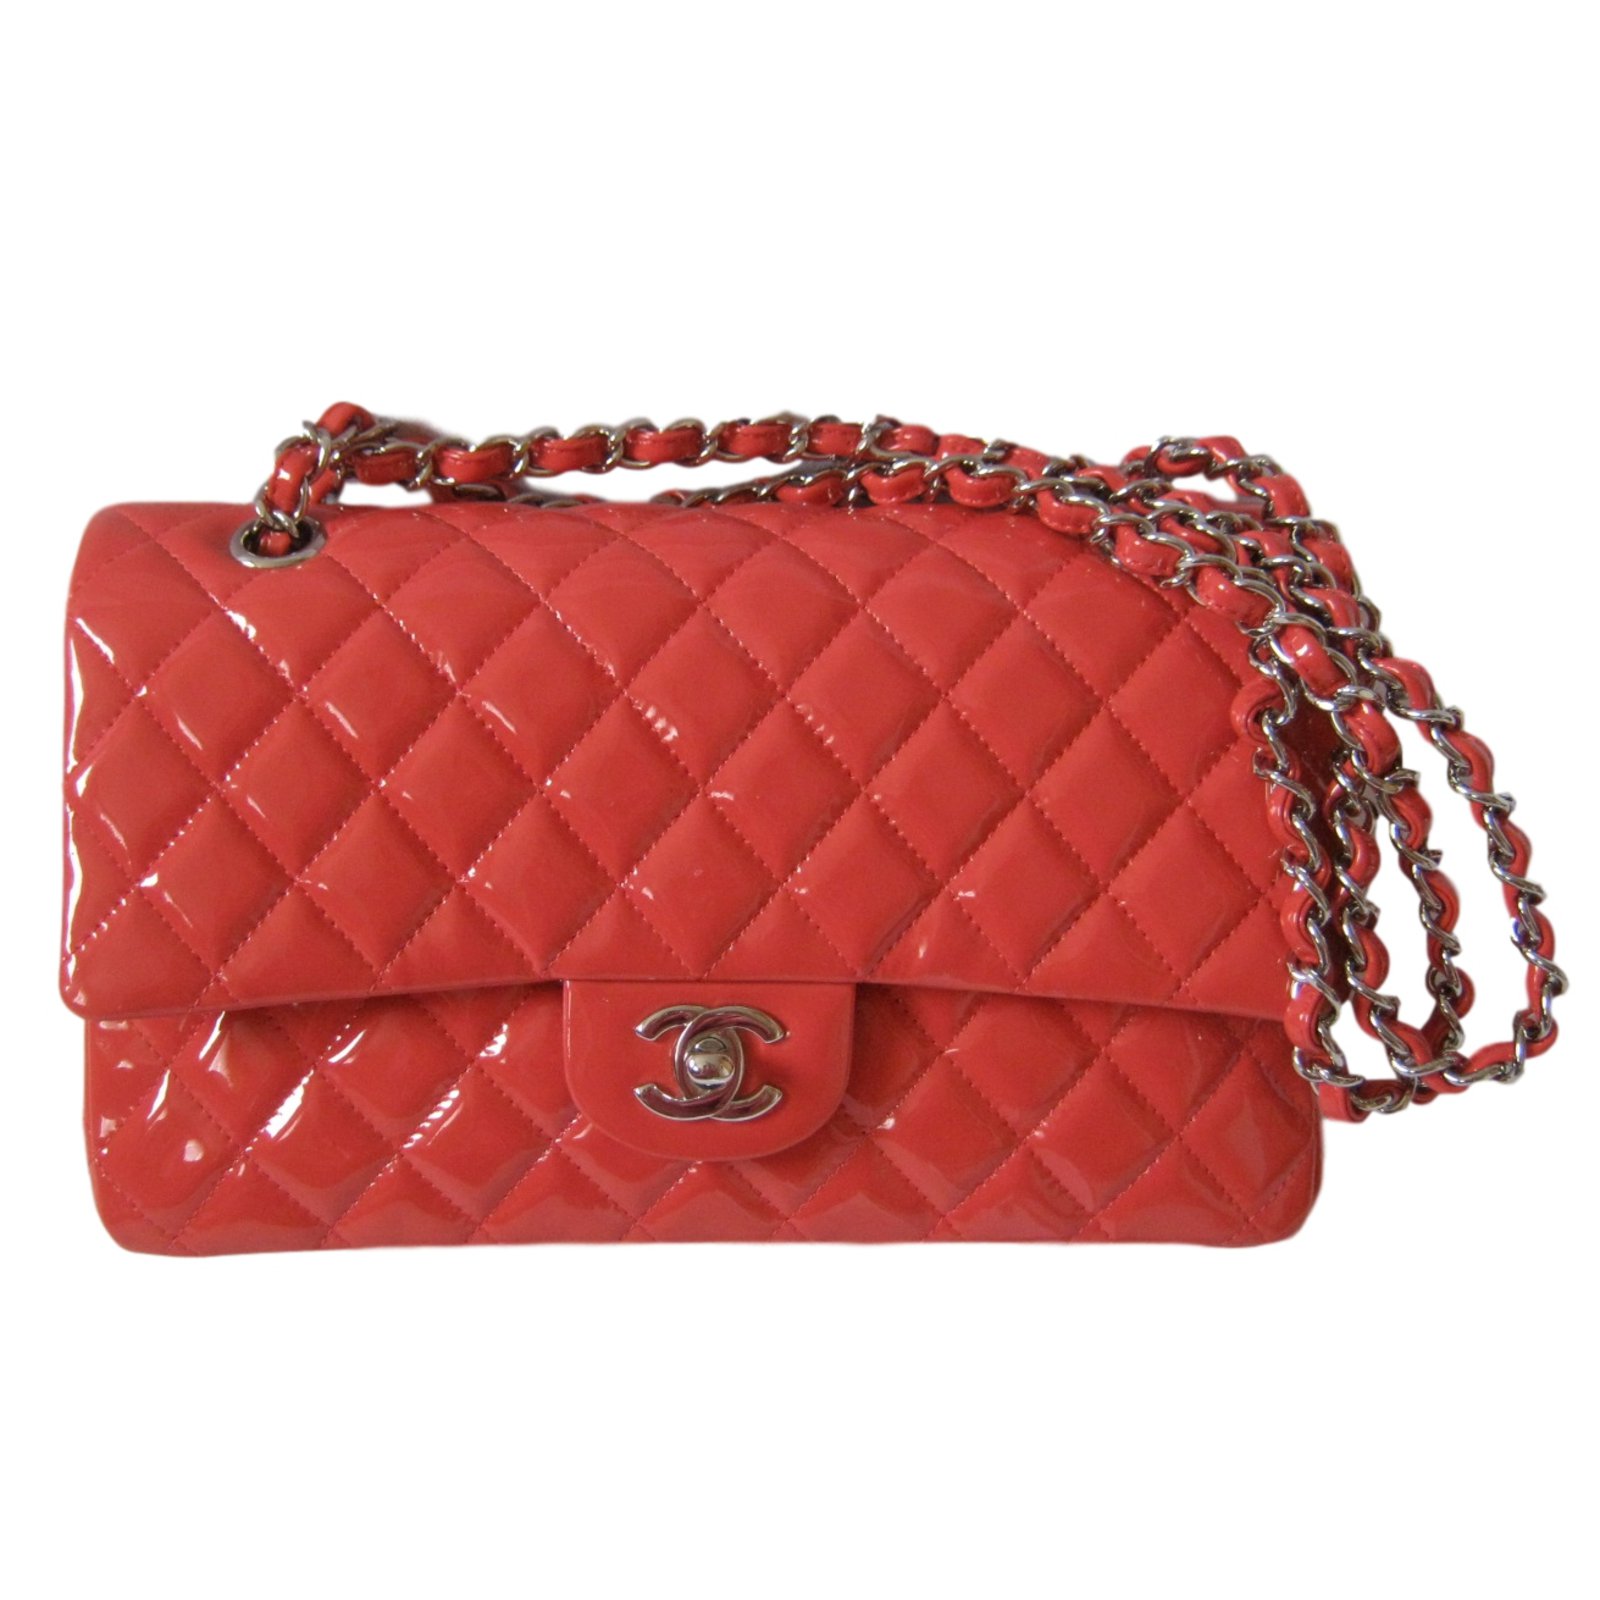 red leather chanel bag black